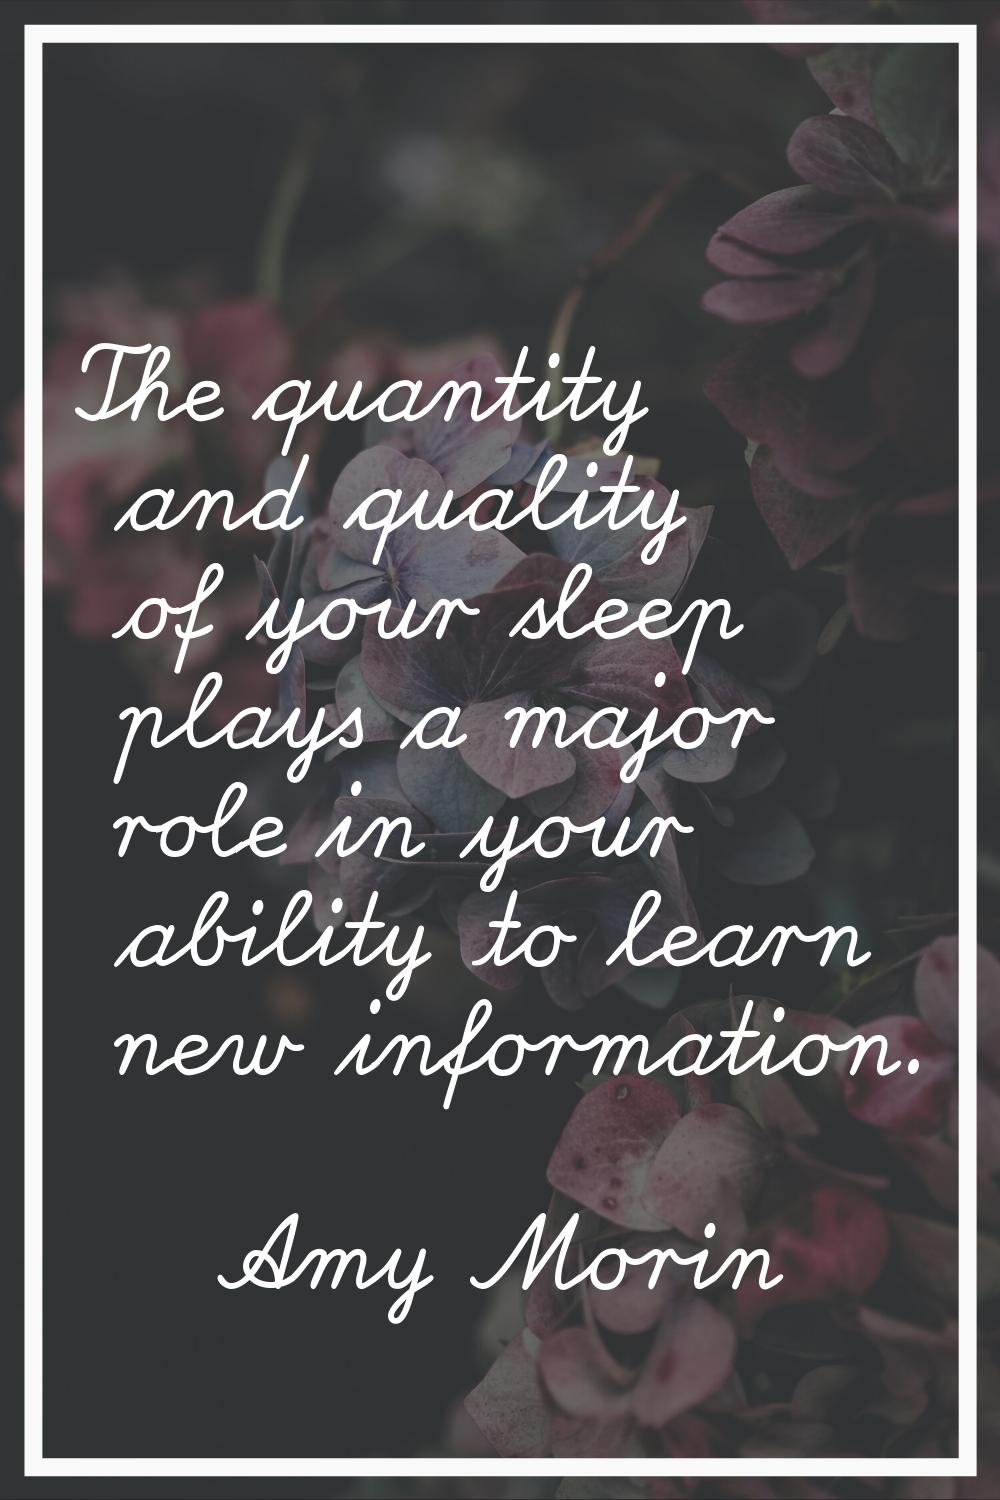 The quantity and quality of your sleep plays a major role in your ability to learn new information.